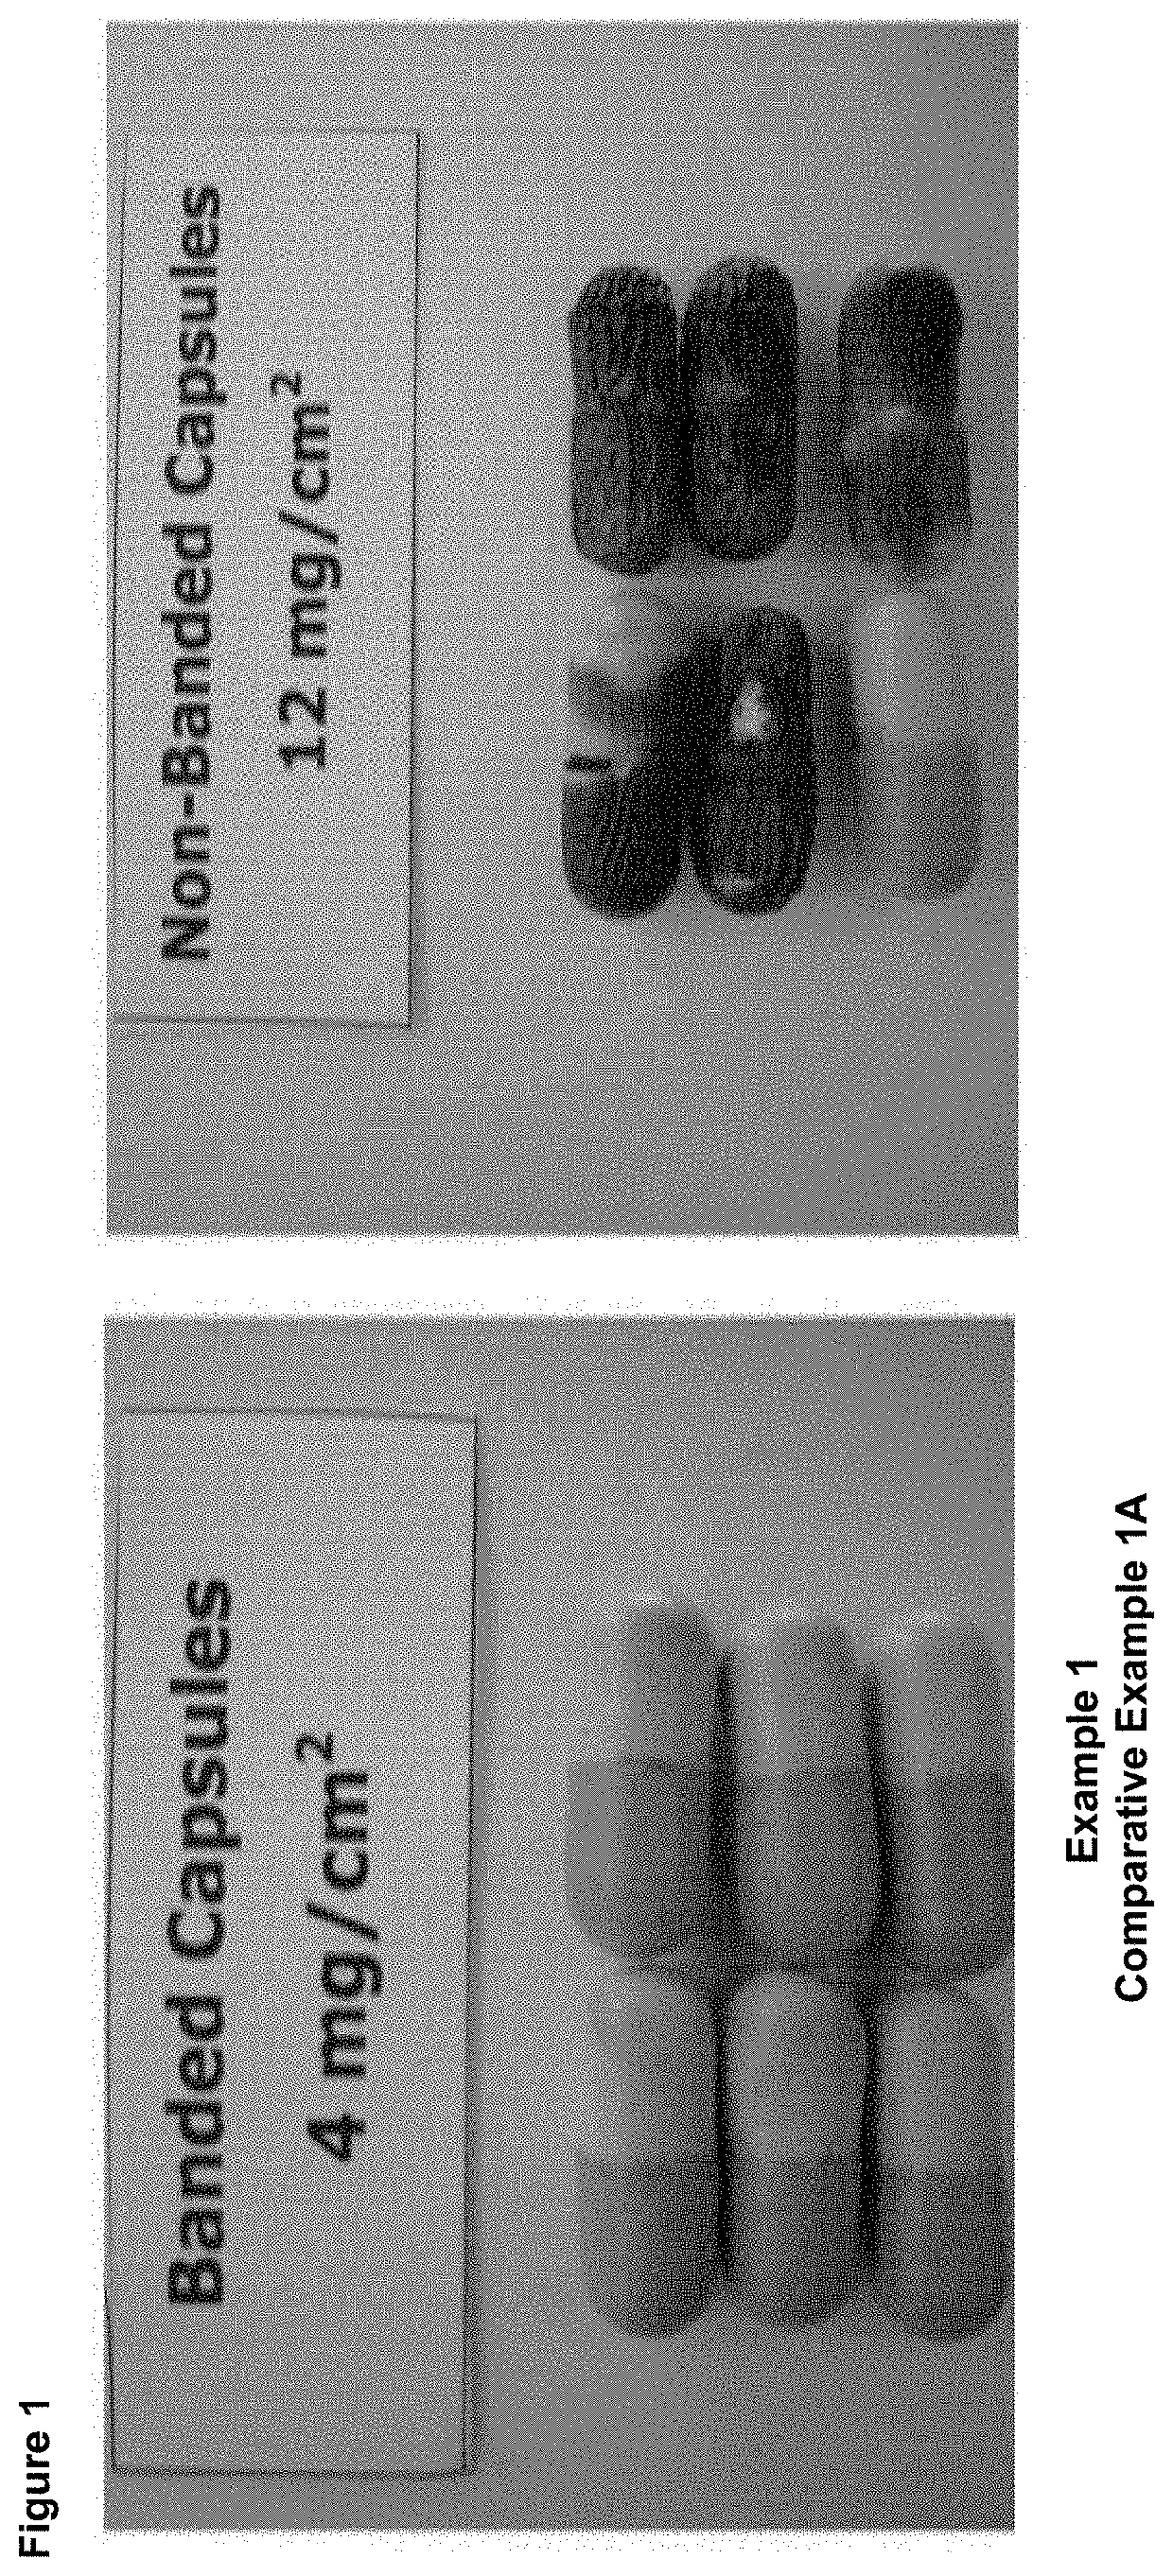 Modified release coated capsules